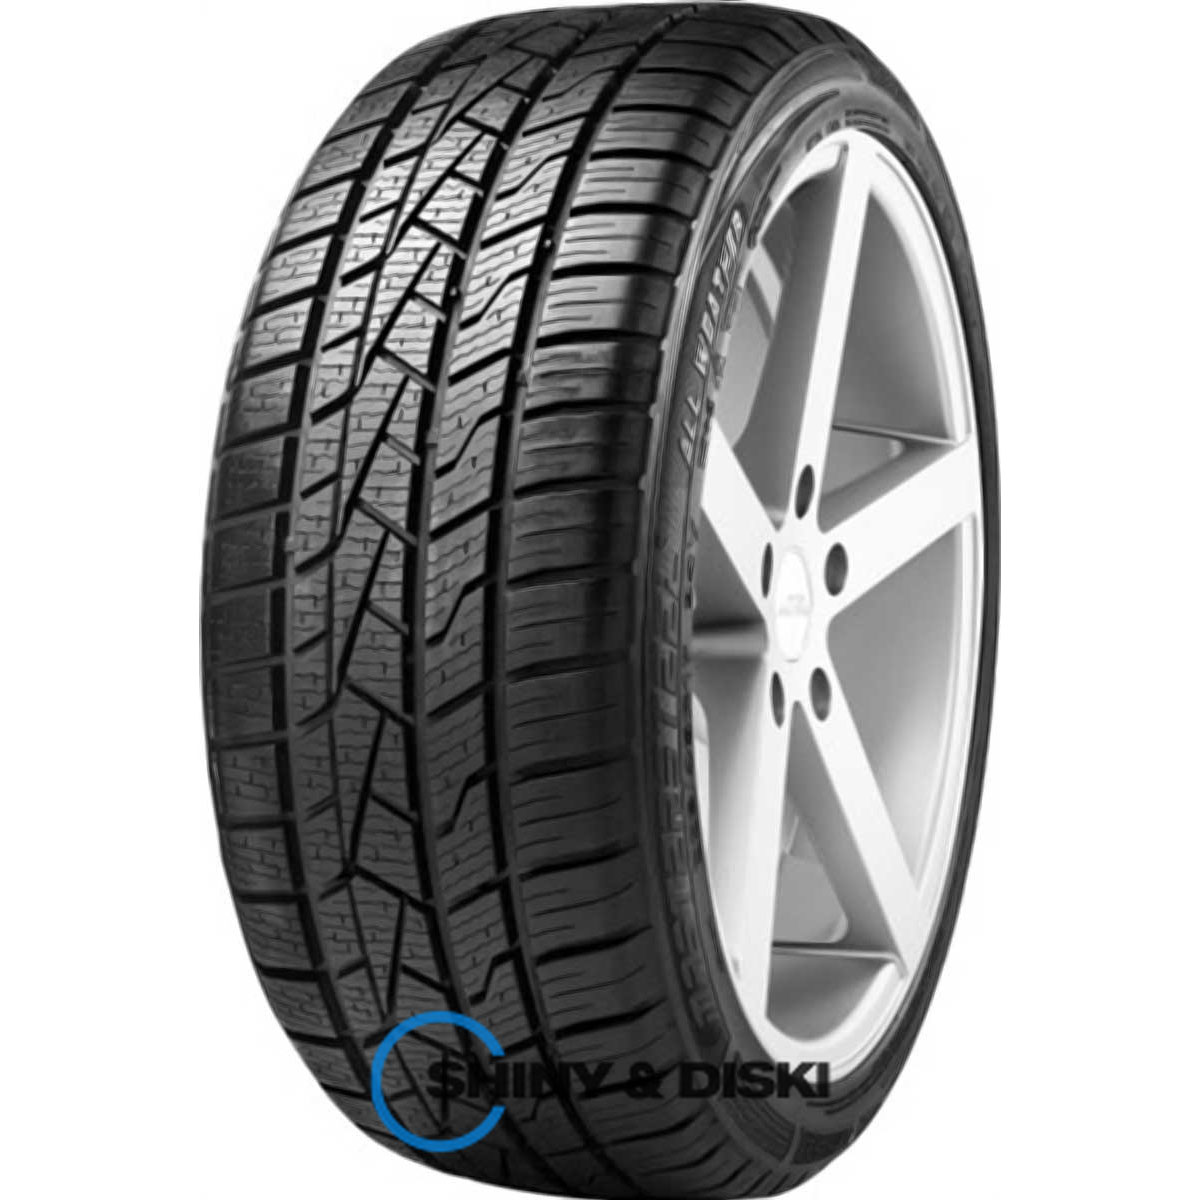 mastersteel all weather 165/70 r14 85t